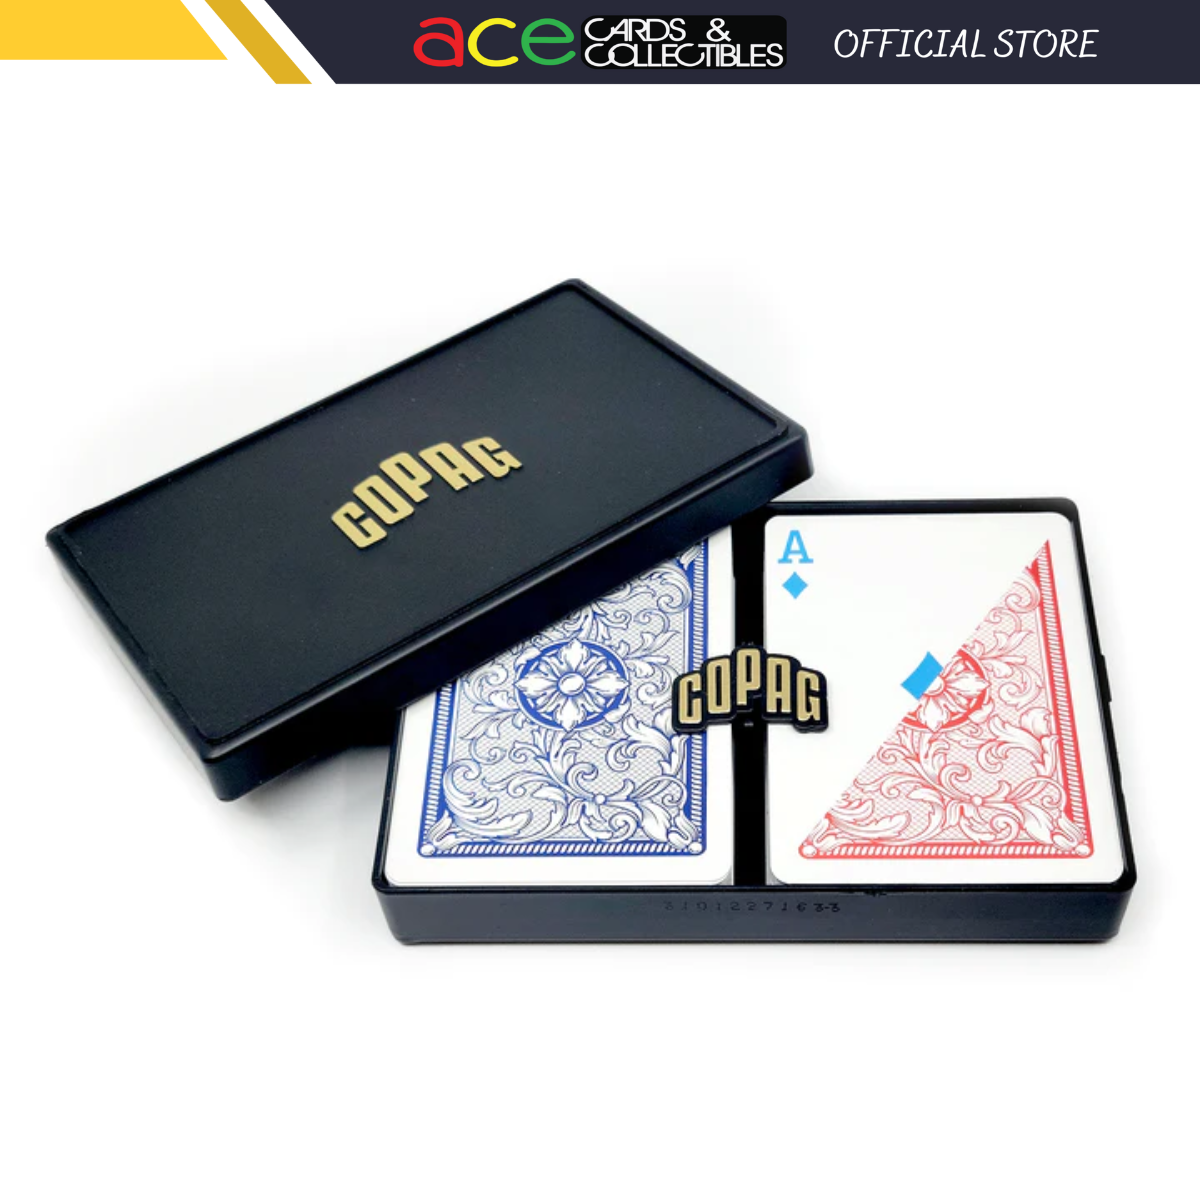 Copag Legacy 100% Plastic Playing Cards Poker Size Regular Index Double Deck Set-Red/Blue-Copag-Ace Cards & Collectibles